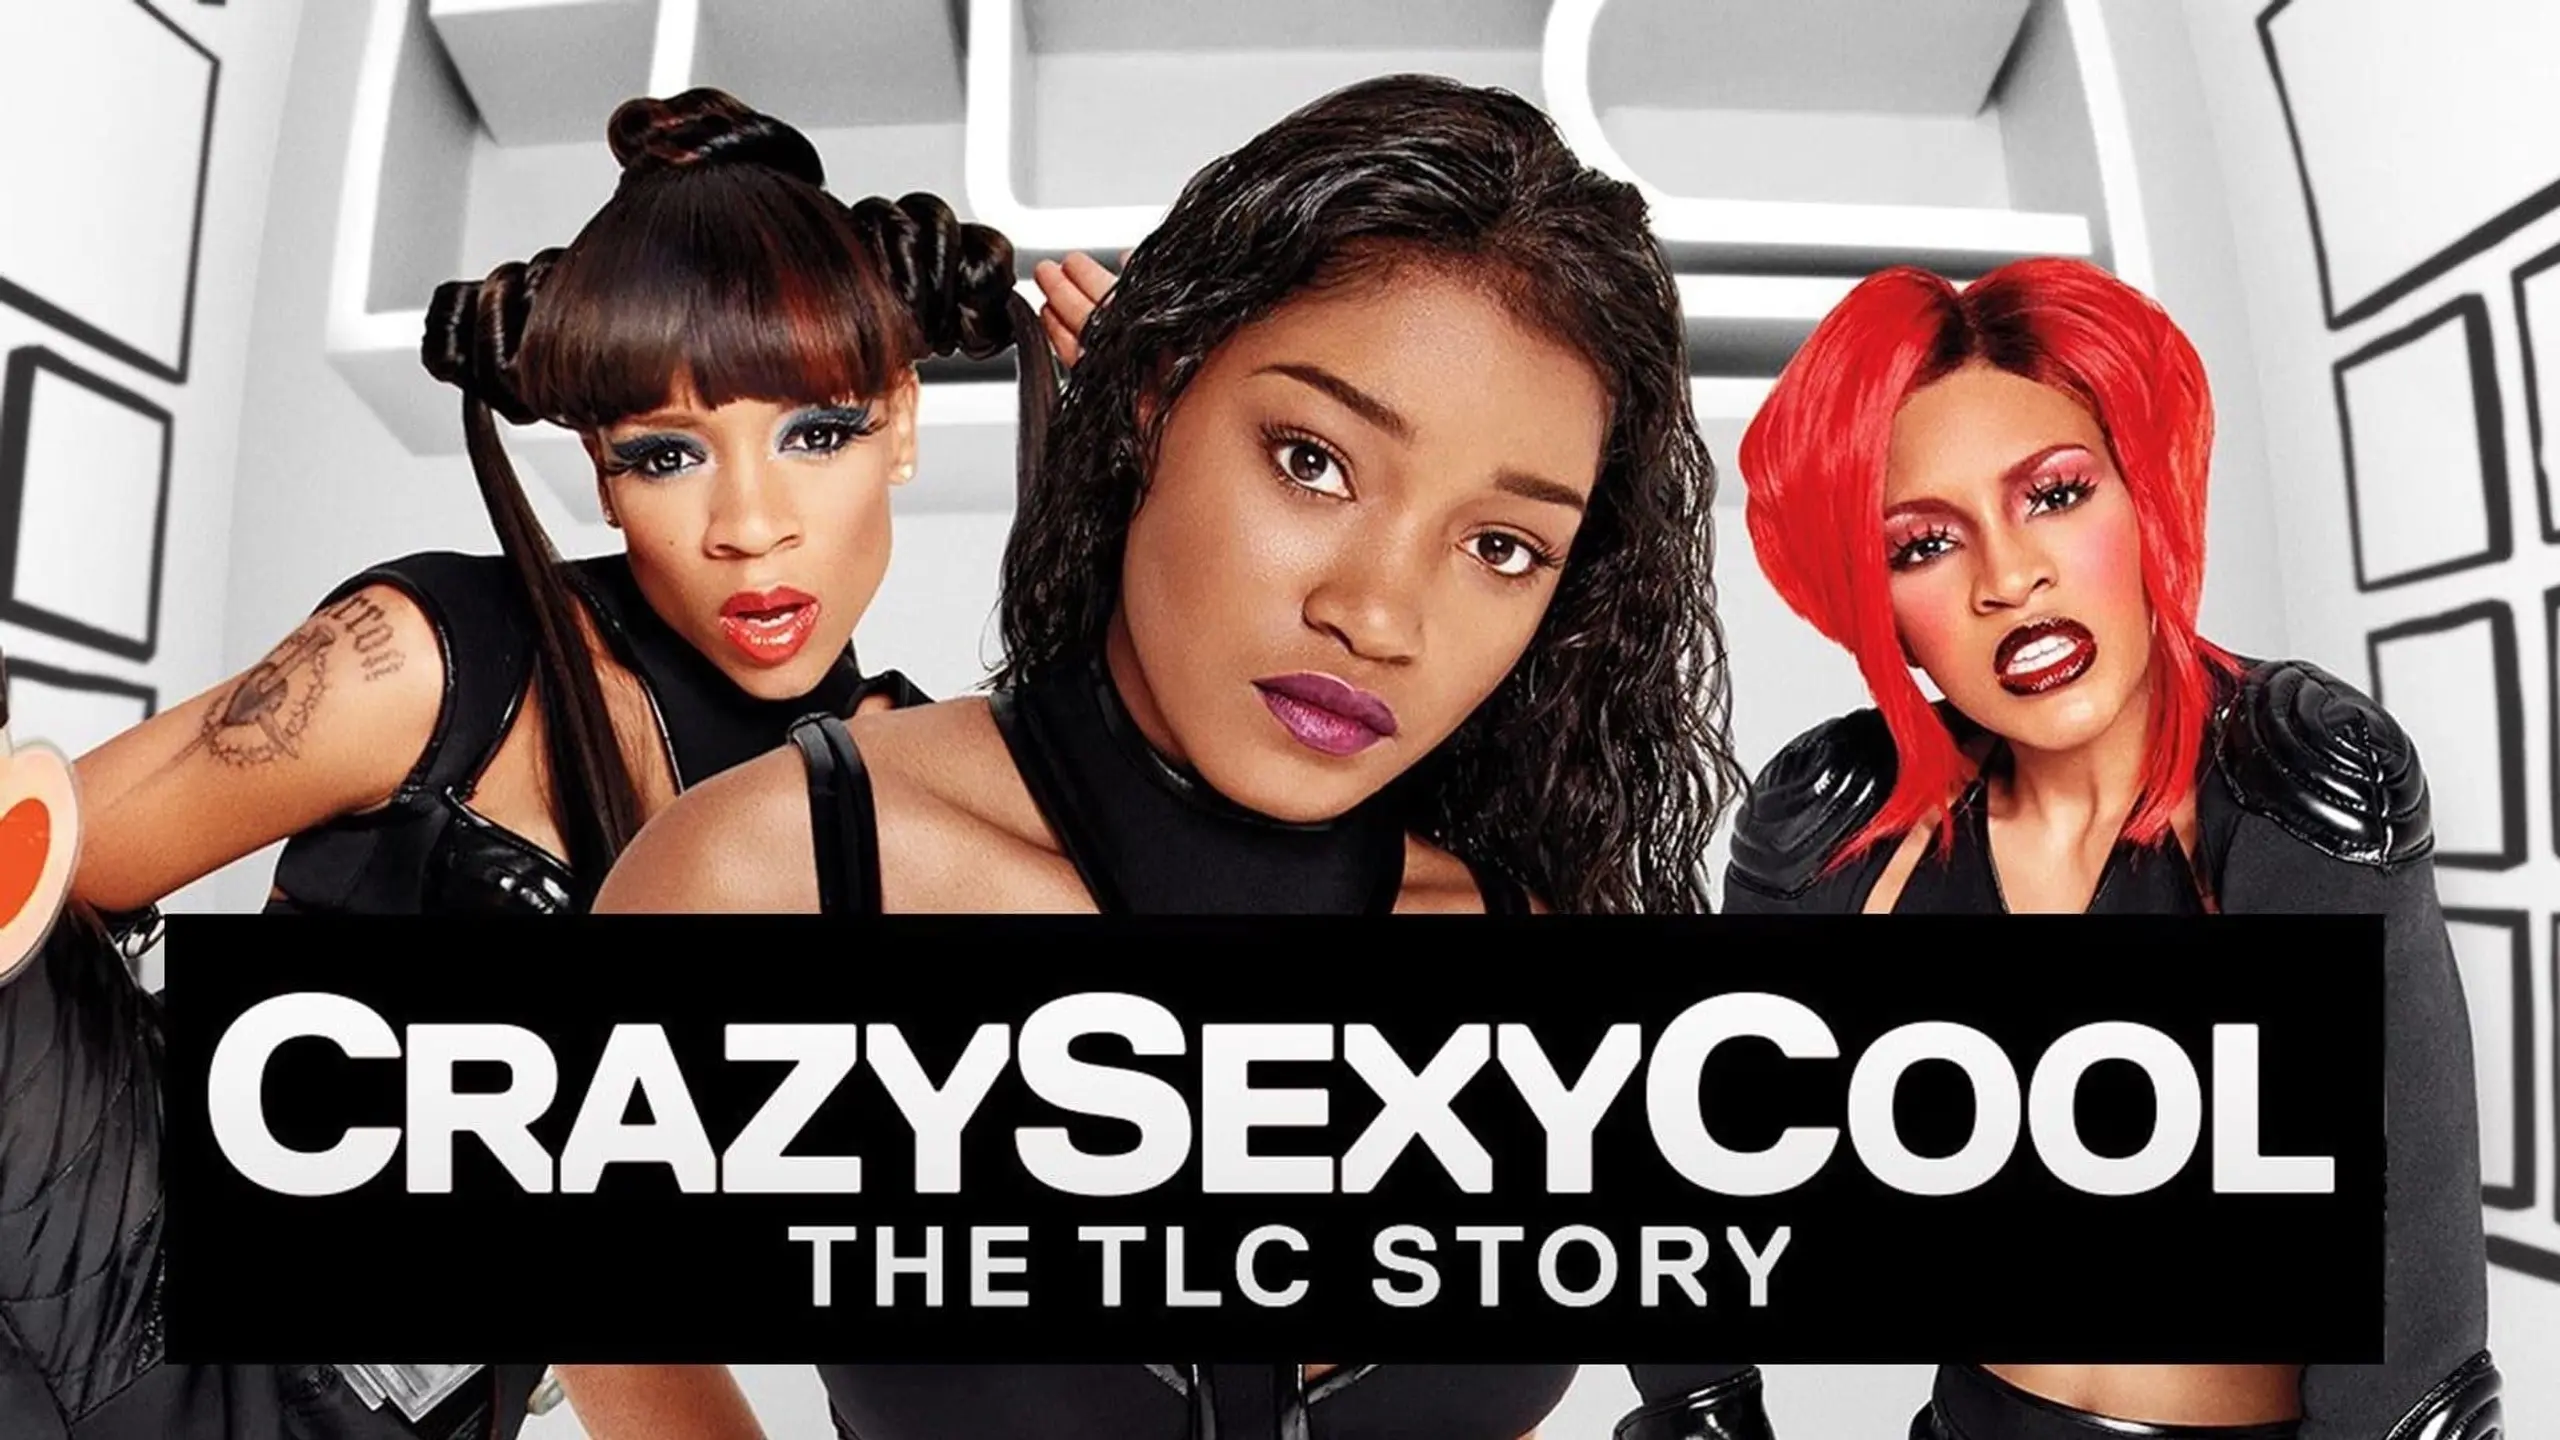 Crazy Sexy Cool: The TLC Story